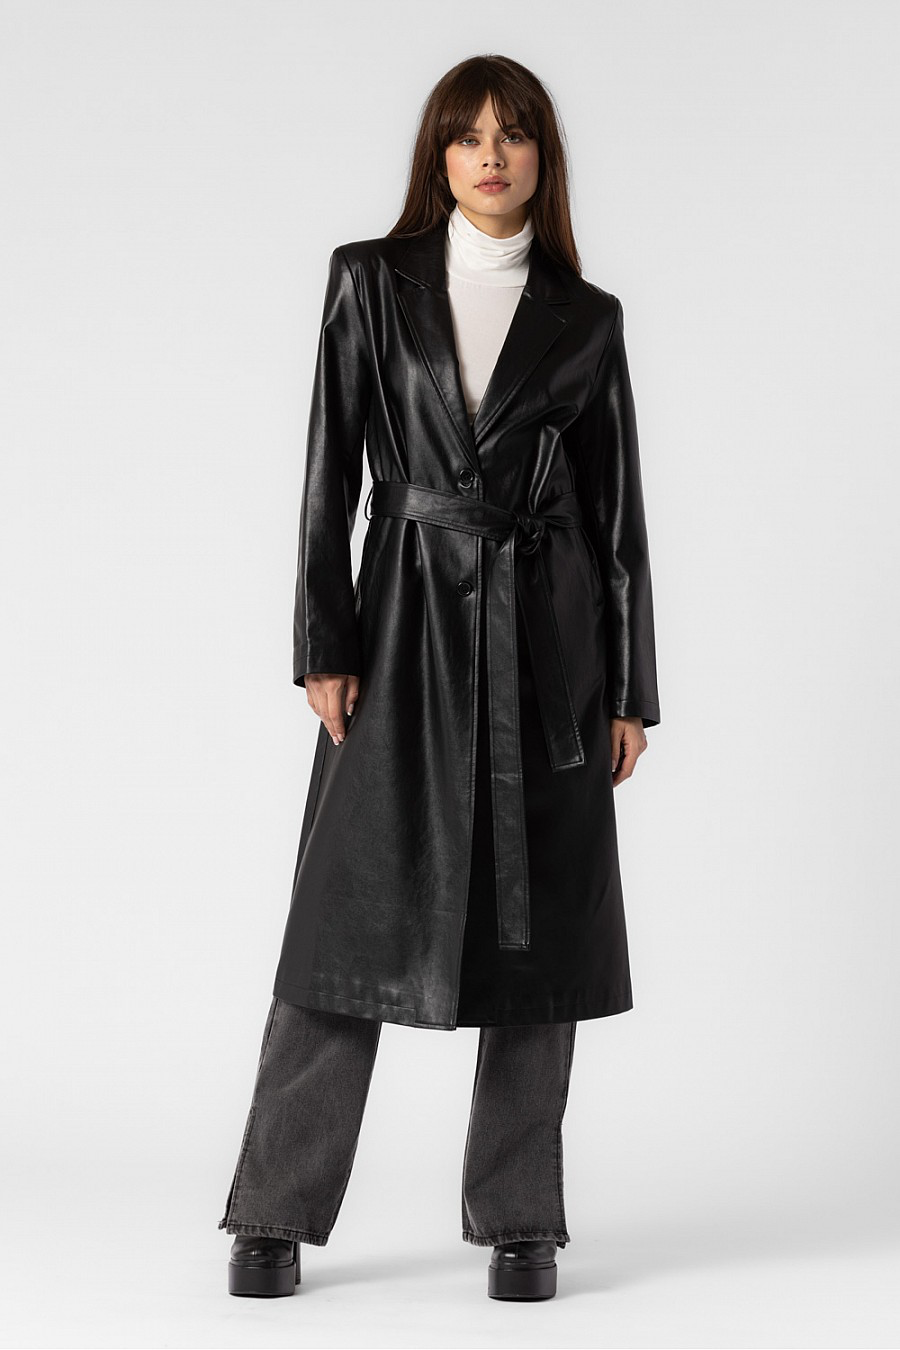 Black trench coat with belt. 